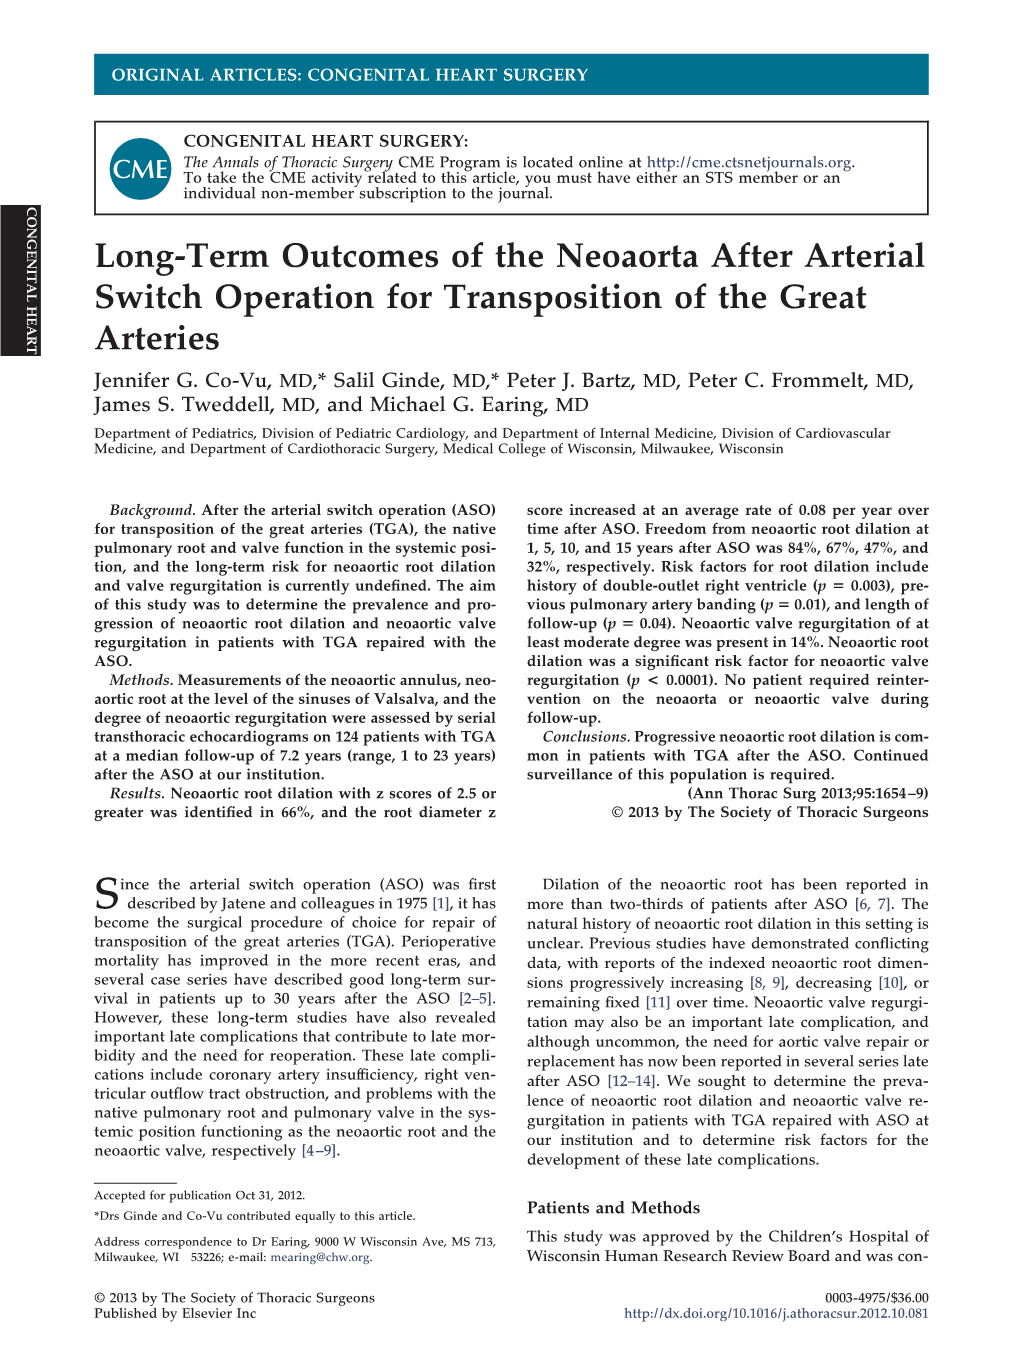 Long-Term Outcomes of the Neoaorta After Arterial Switch Operation for Transposition of the Great Arteries Jennifer G